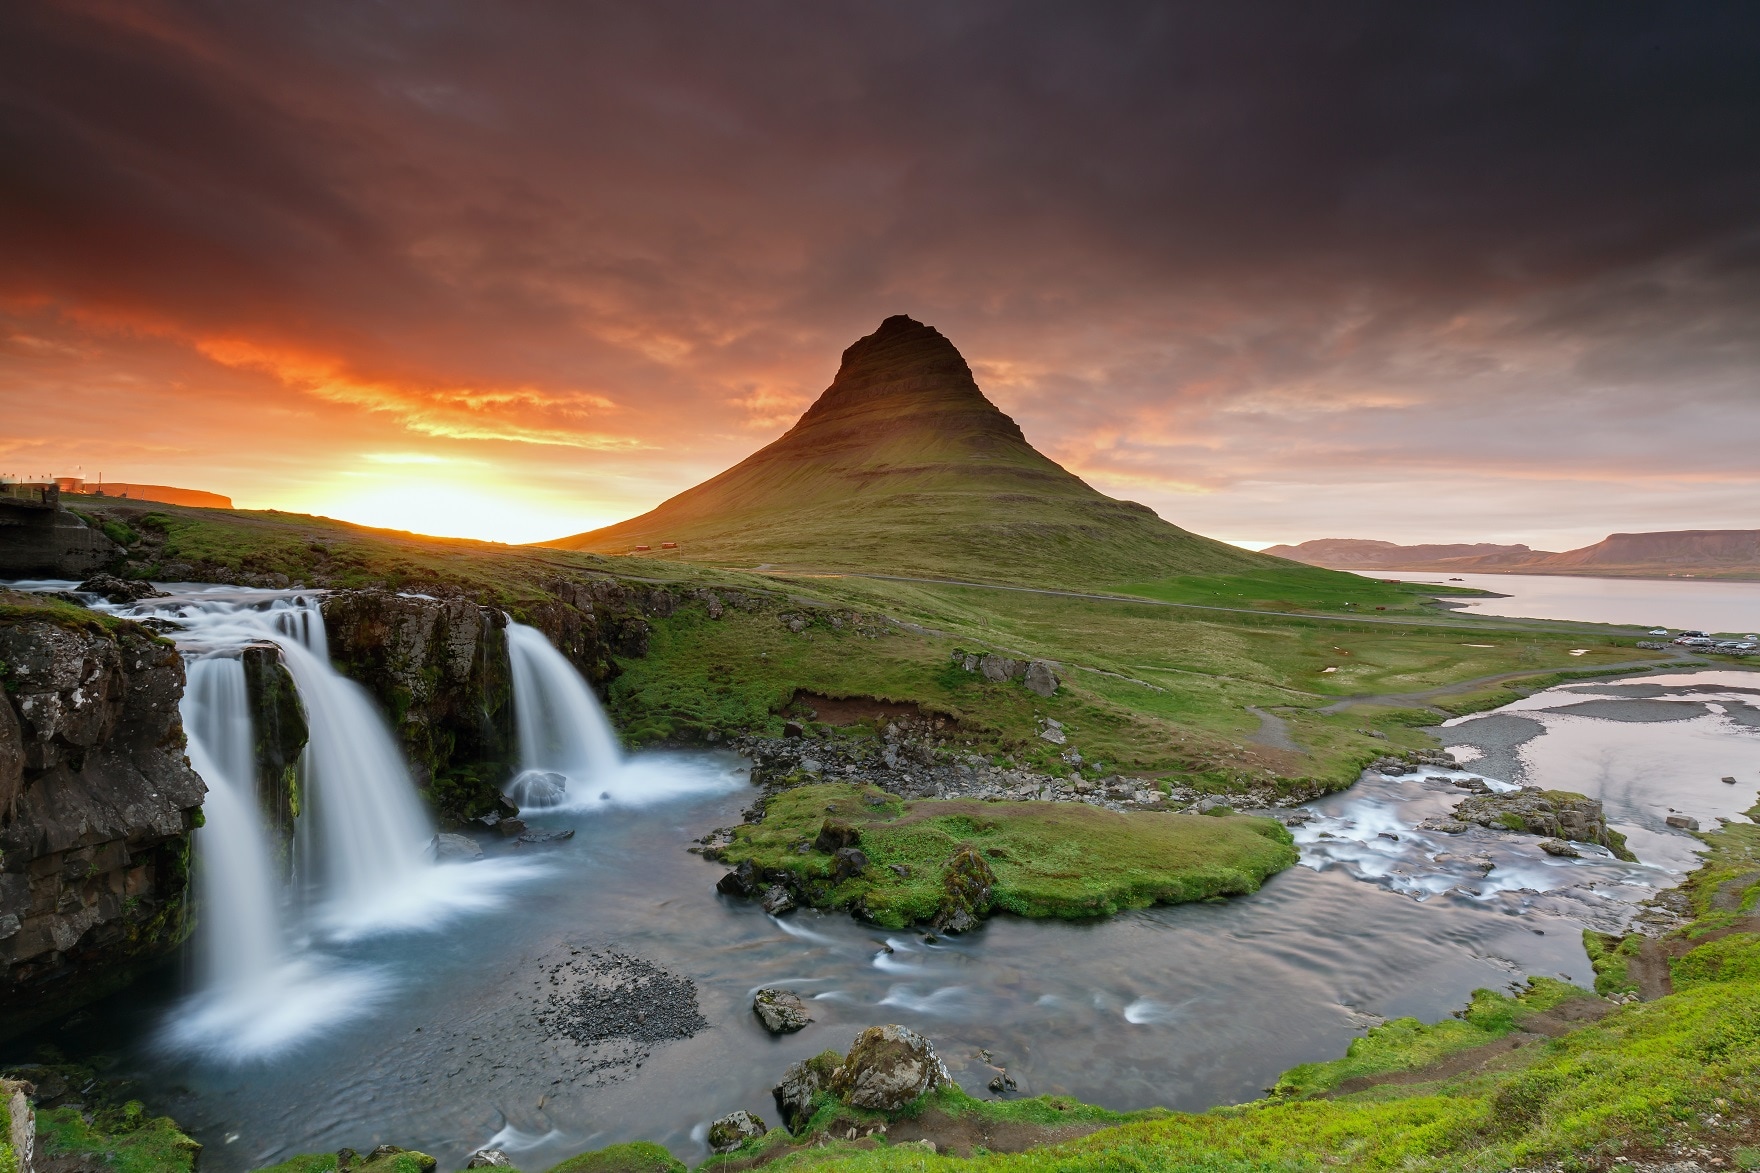 Iceland's Waterfalls & Beaches - There's more to Iceland than Ice!